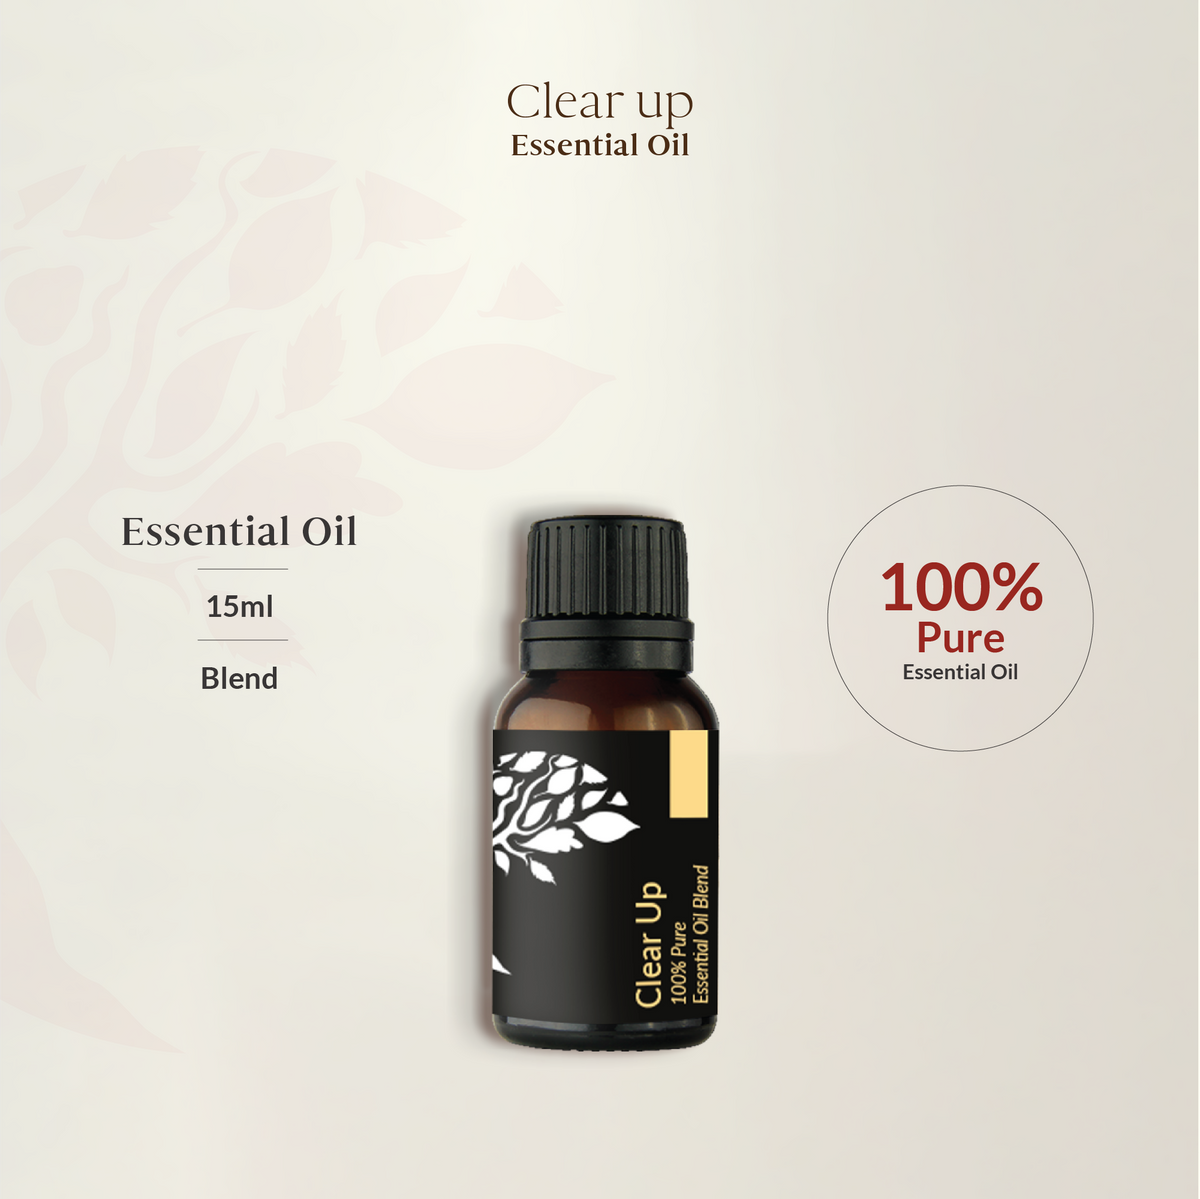 Clear Up Essential Oil Blend 15ml